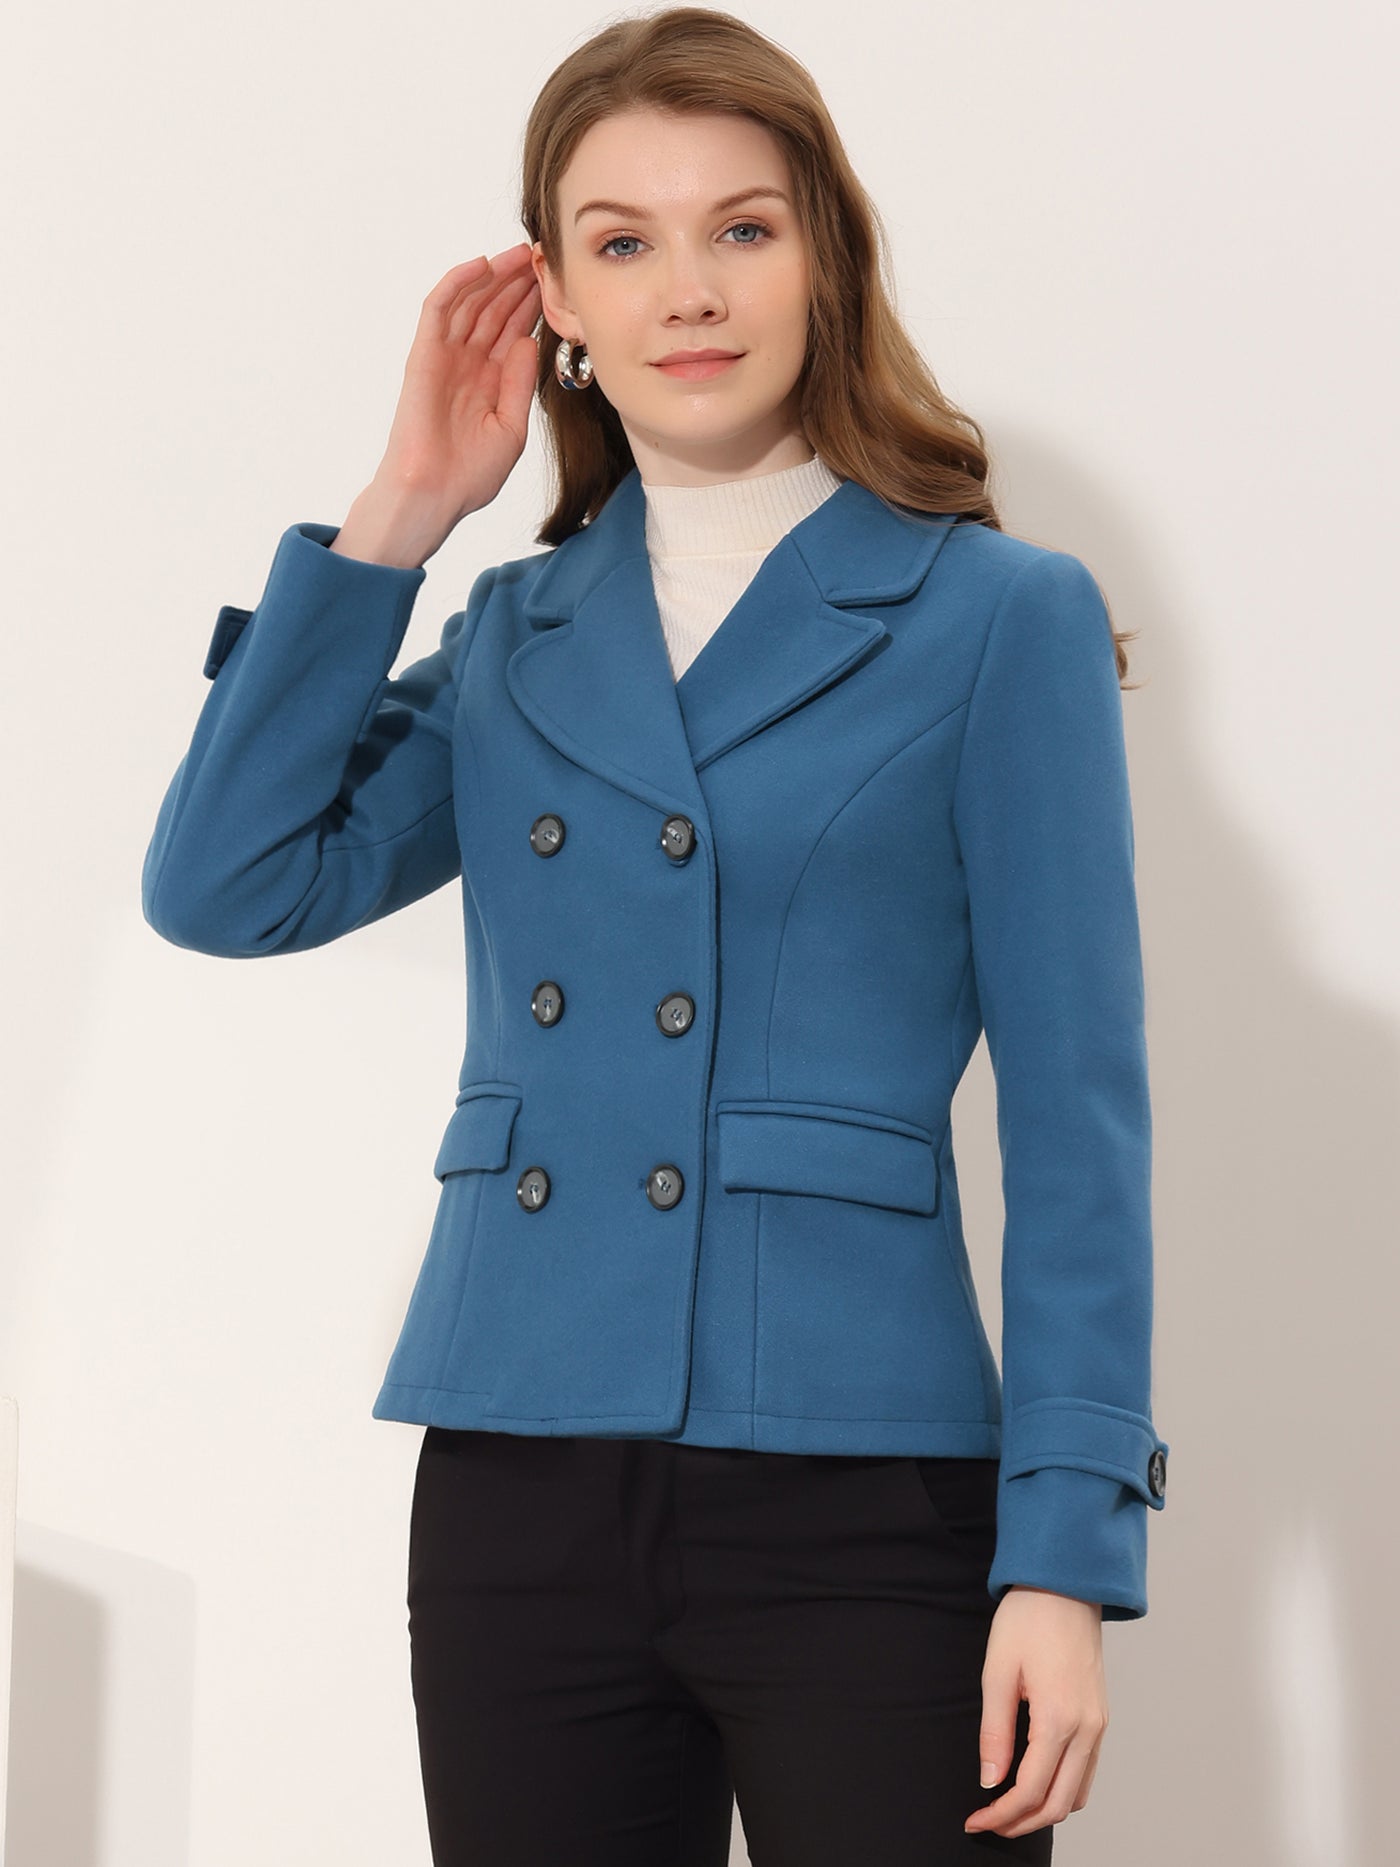 Allegra K Winter Notched Lapel Double Breasted Short Pea Coat